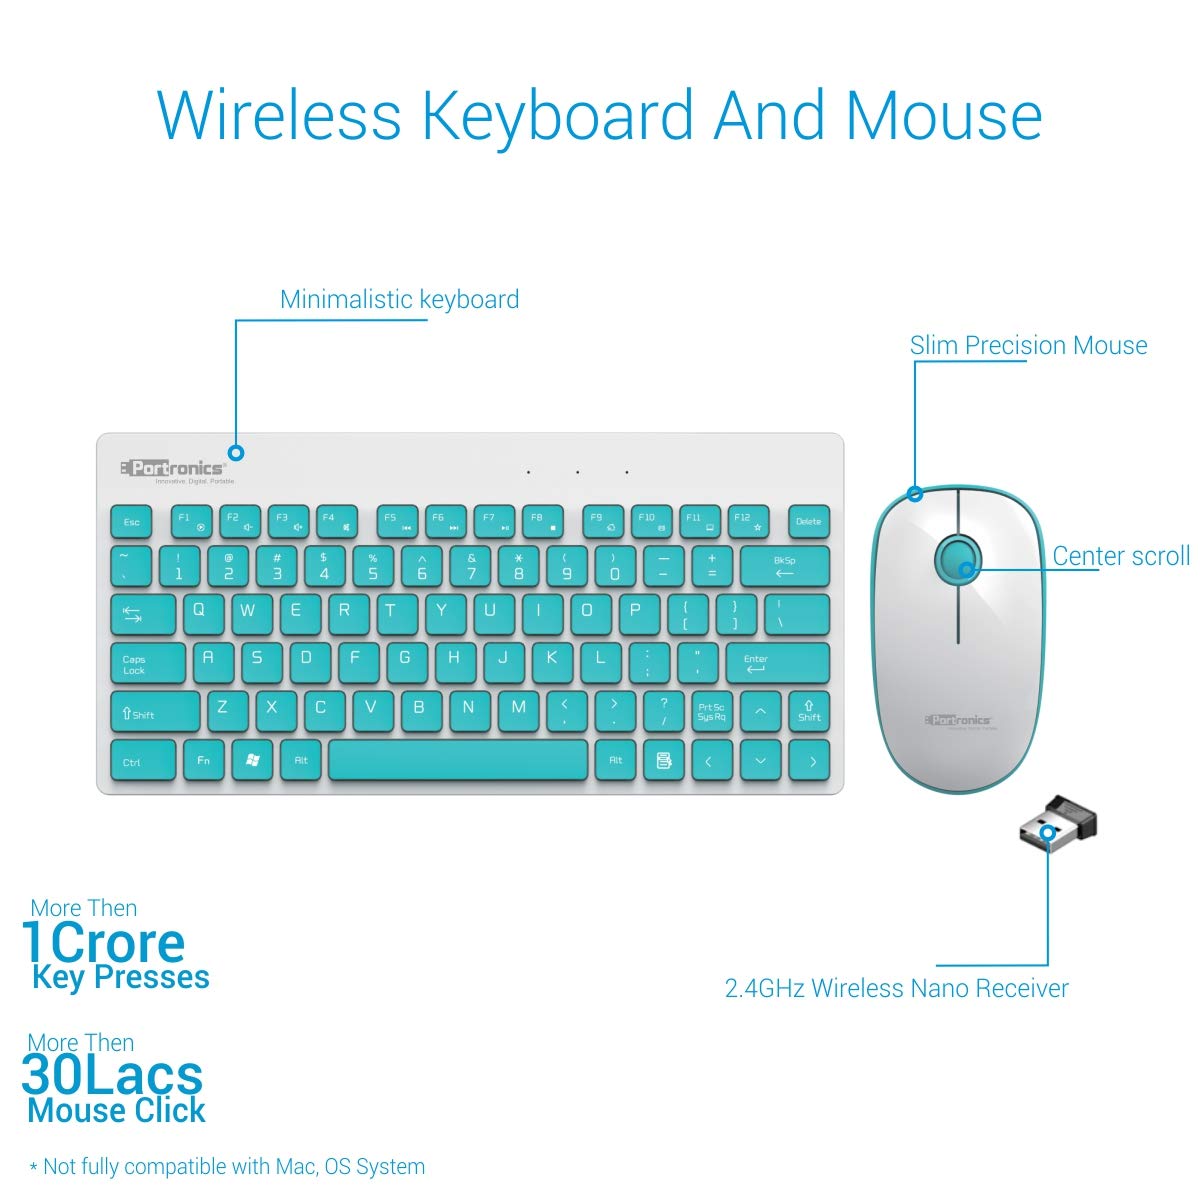 [RePacked] Portronics Key2-A Combo Wireless Keyboard and 1500DPI Optical Mouse Combo - White